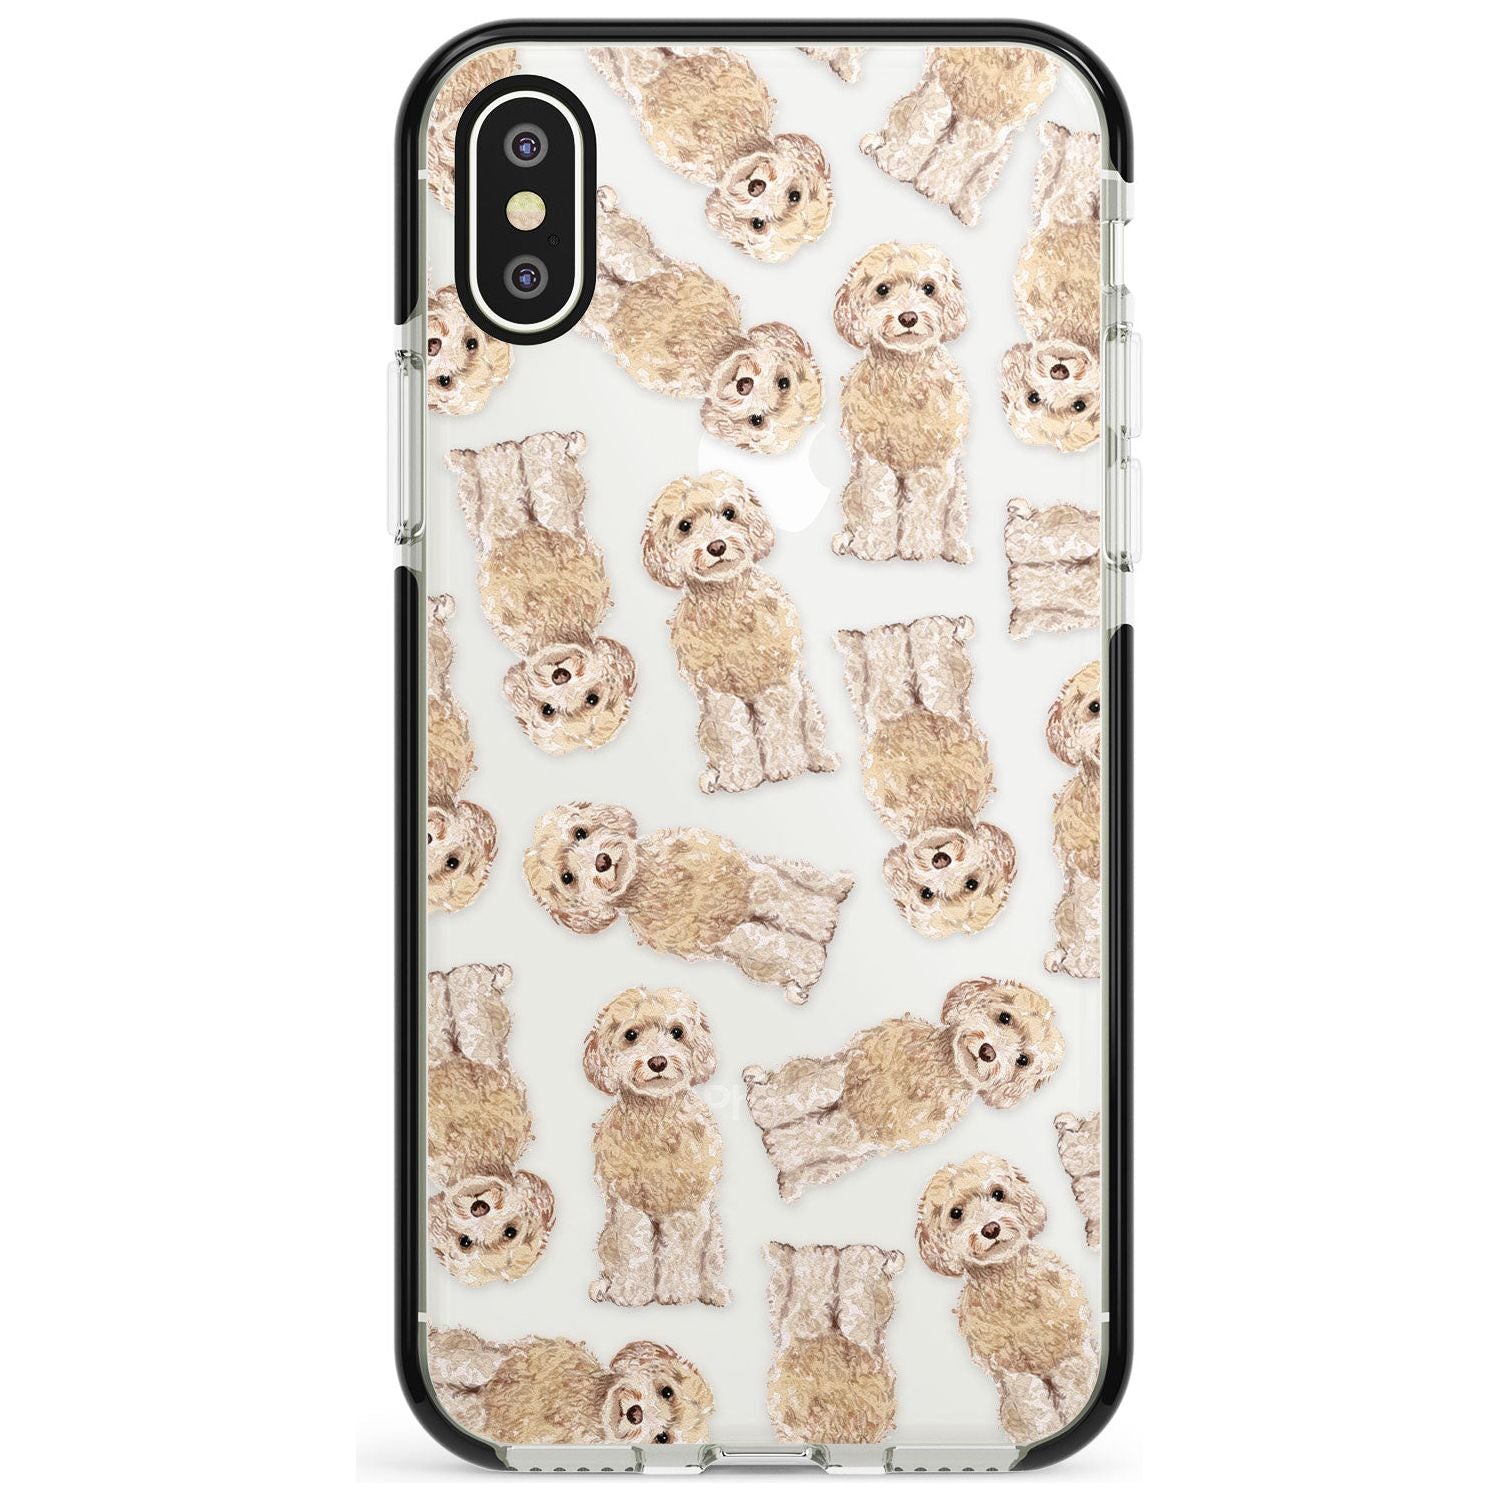 Cockapoo (Champagne) Watercolour Dog Pattern Black Impact Phone Case for iPhone X XS Max XR